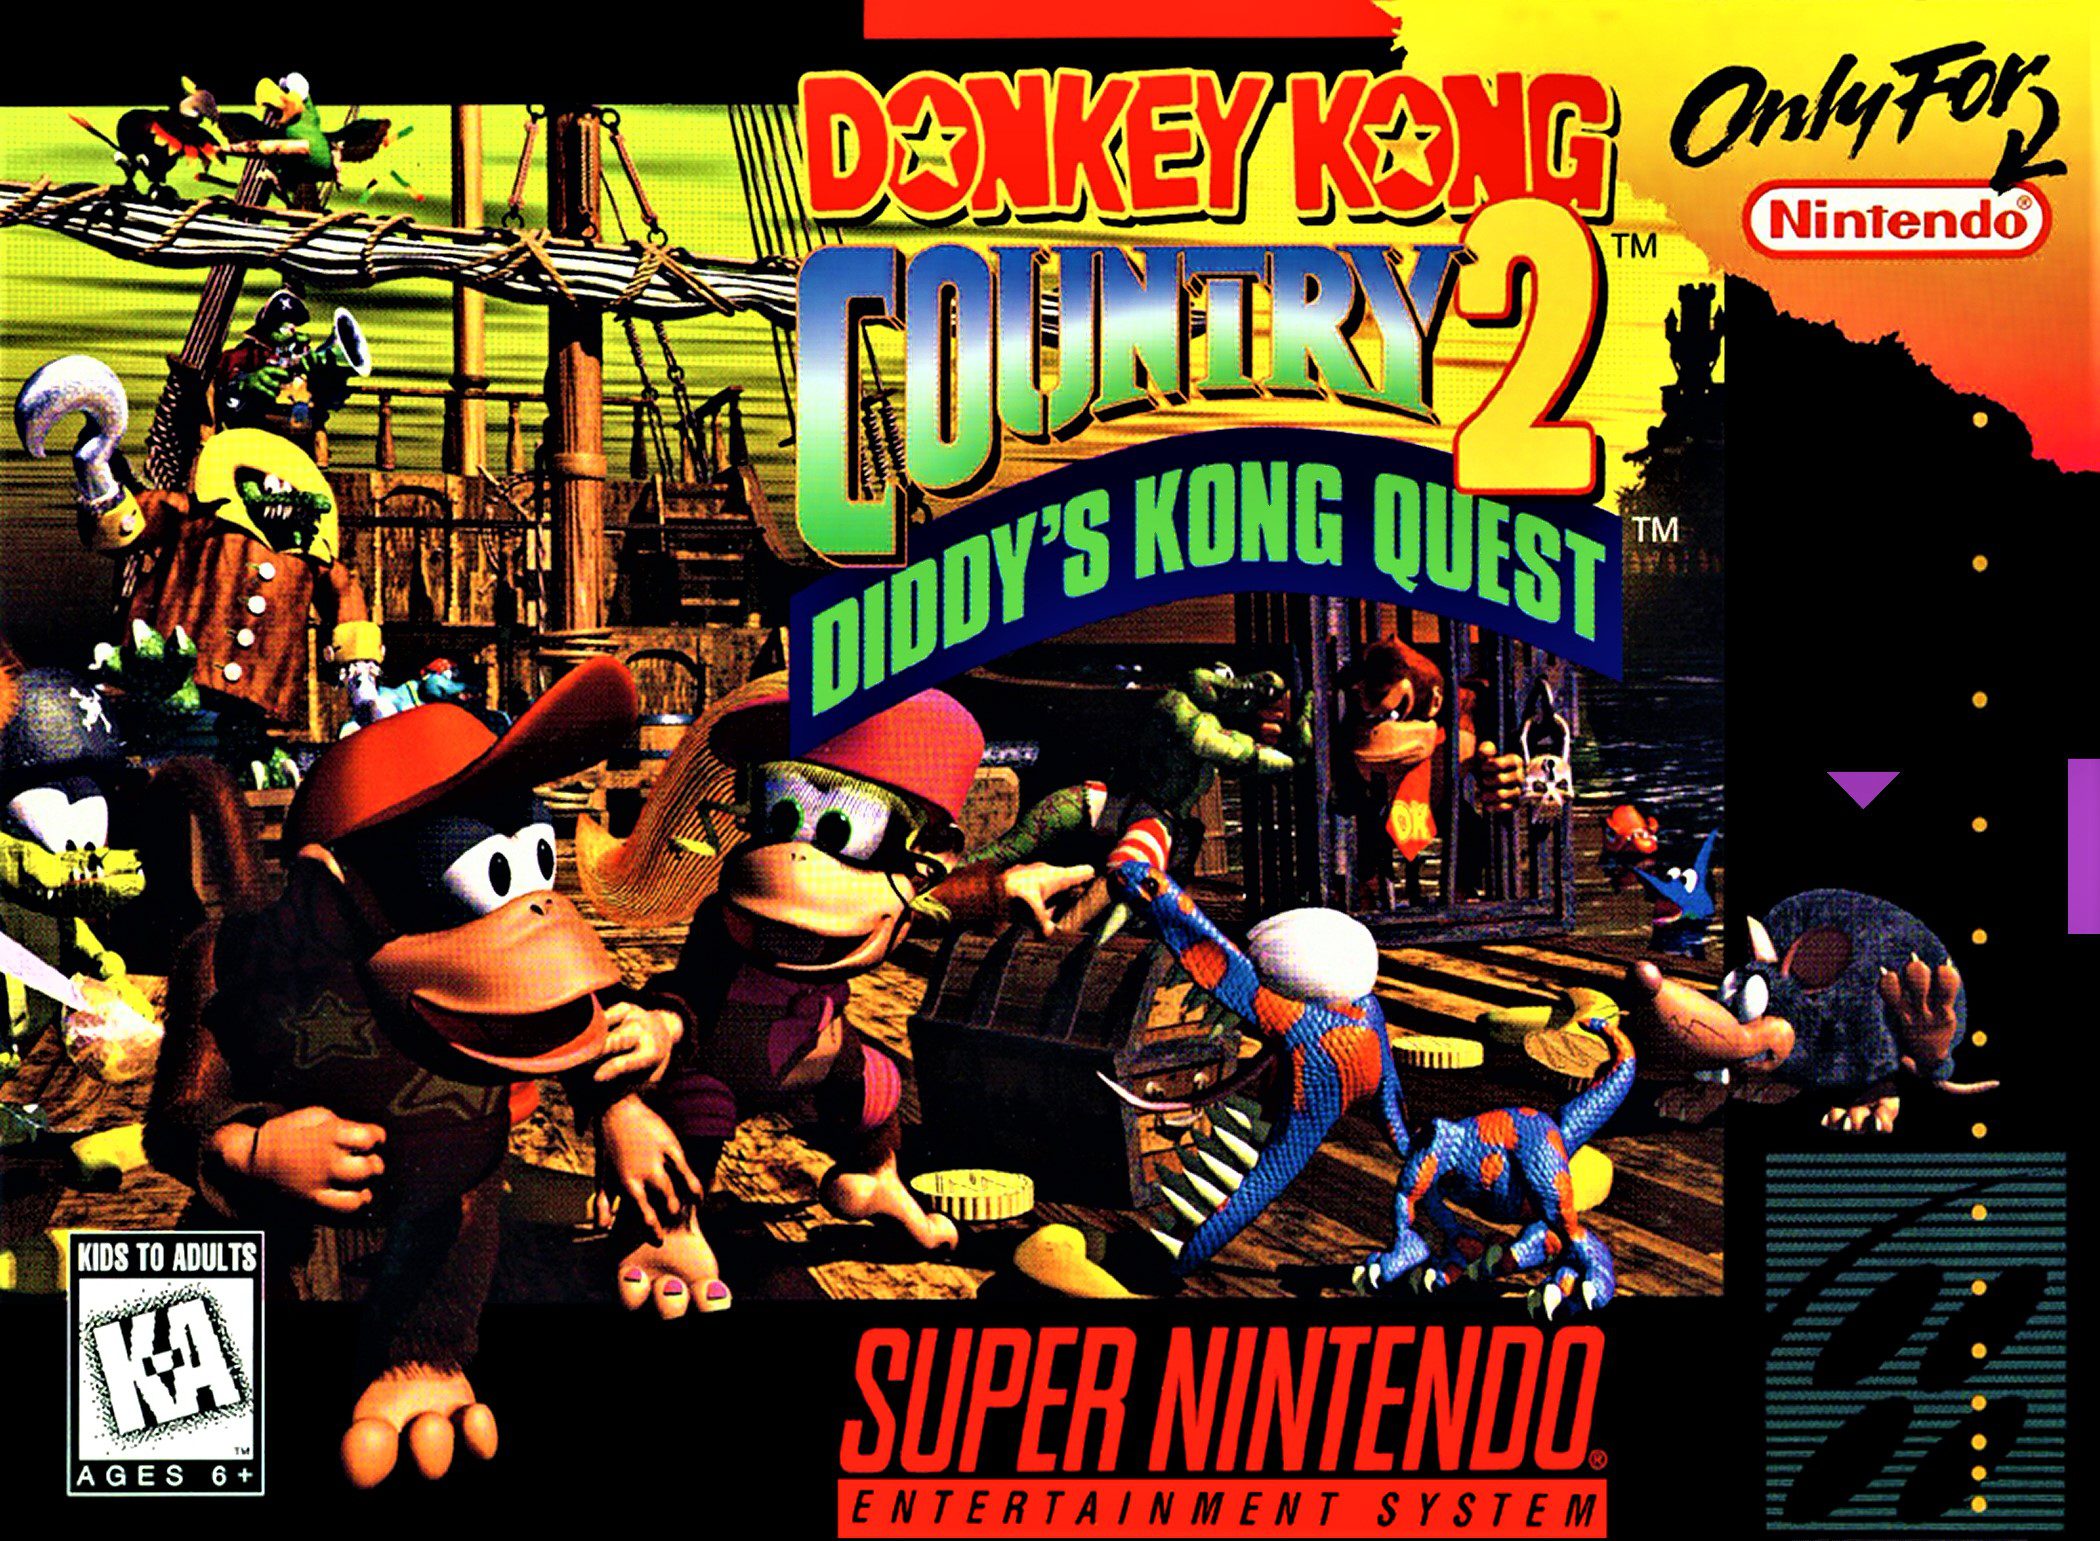 Donkey Kong Country 2: Diddy's Kong Quest for Super Nintendo Entertainment System (SNES)